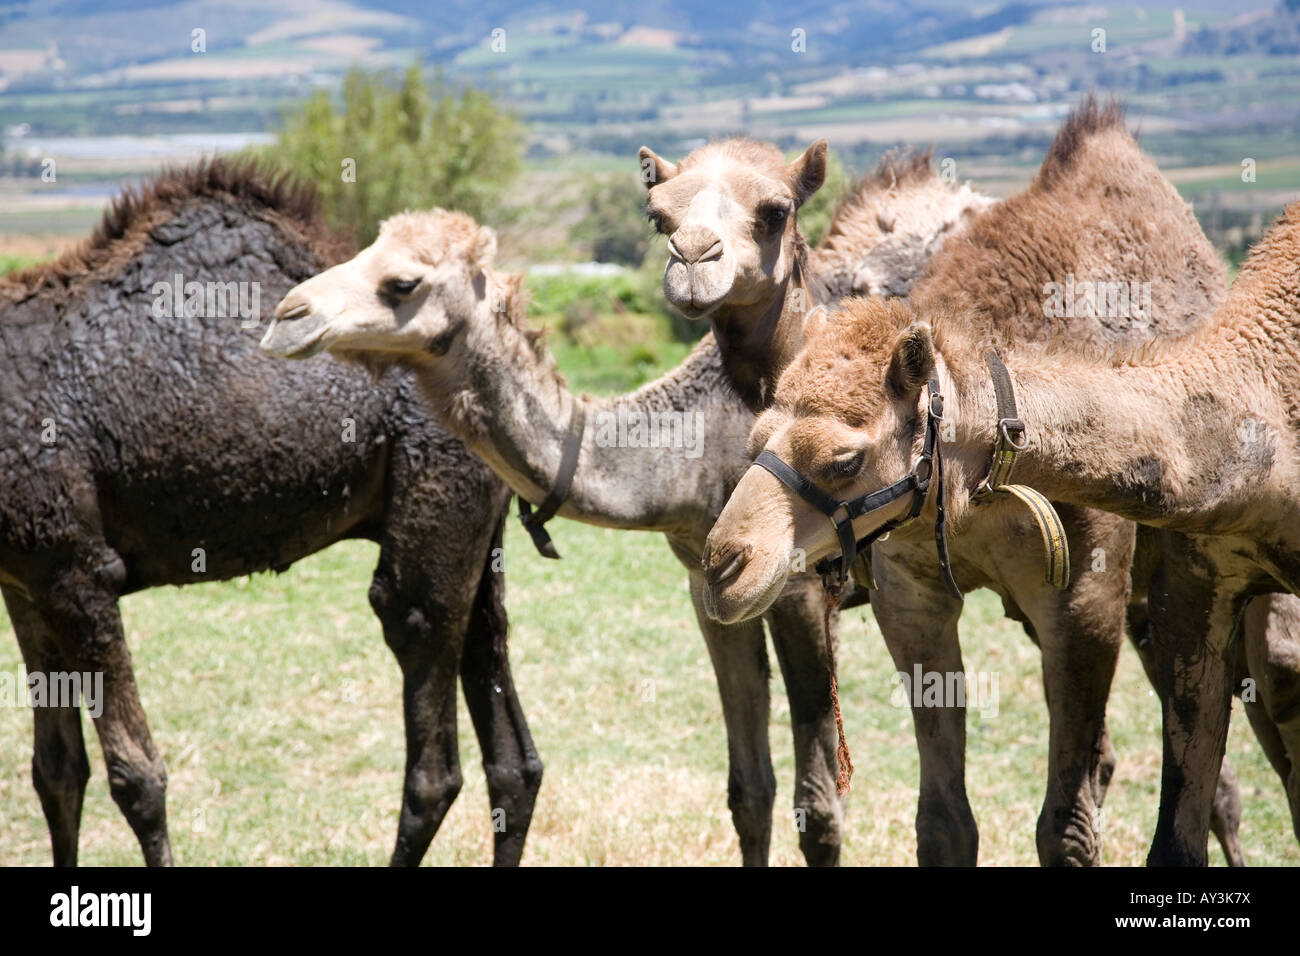 Camels on land in Paarl - South Africa Stock Photo